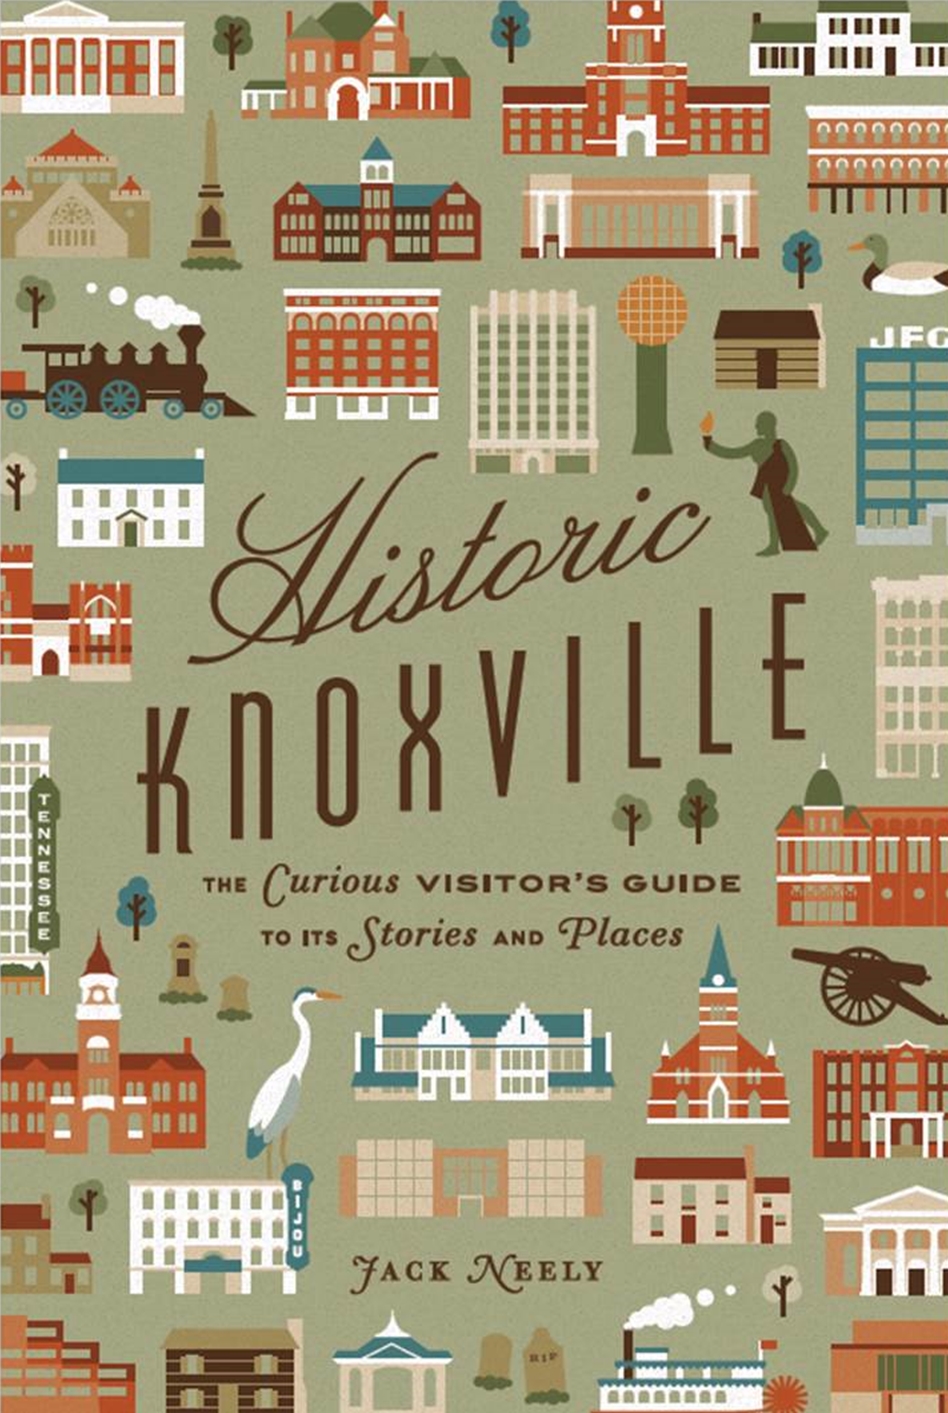 Historic Knoxville Guide - Knoxville History Project